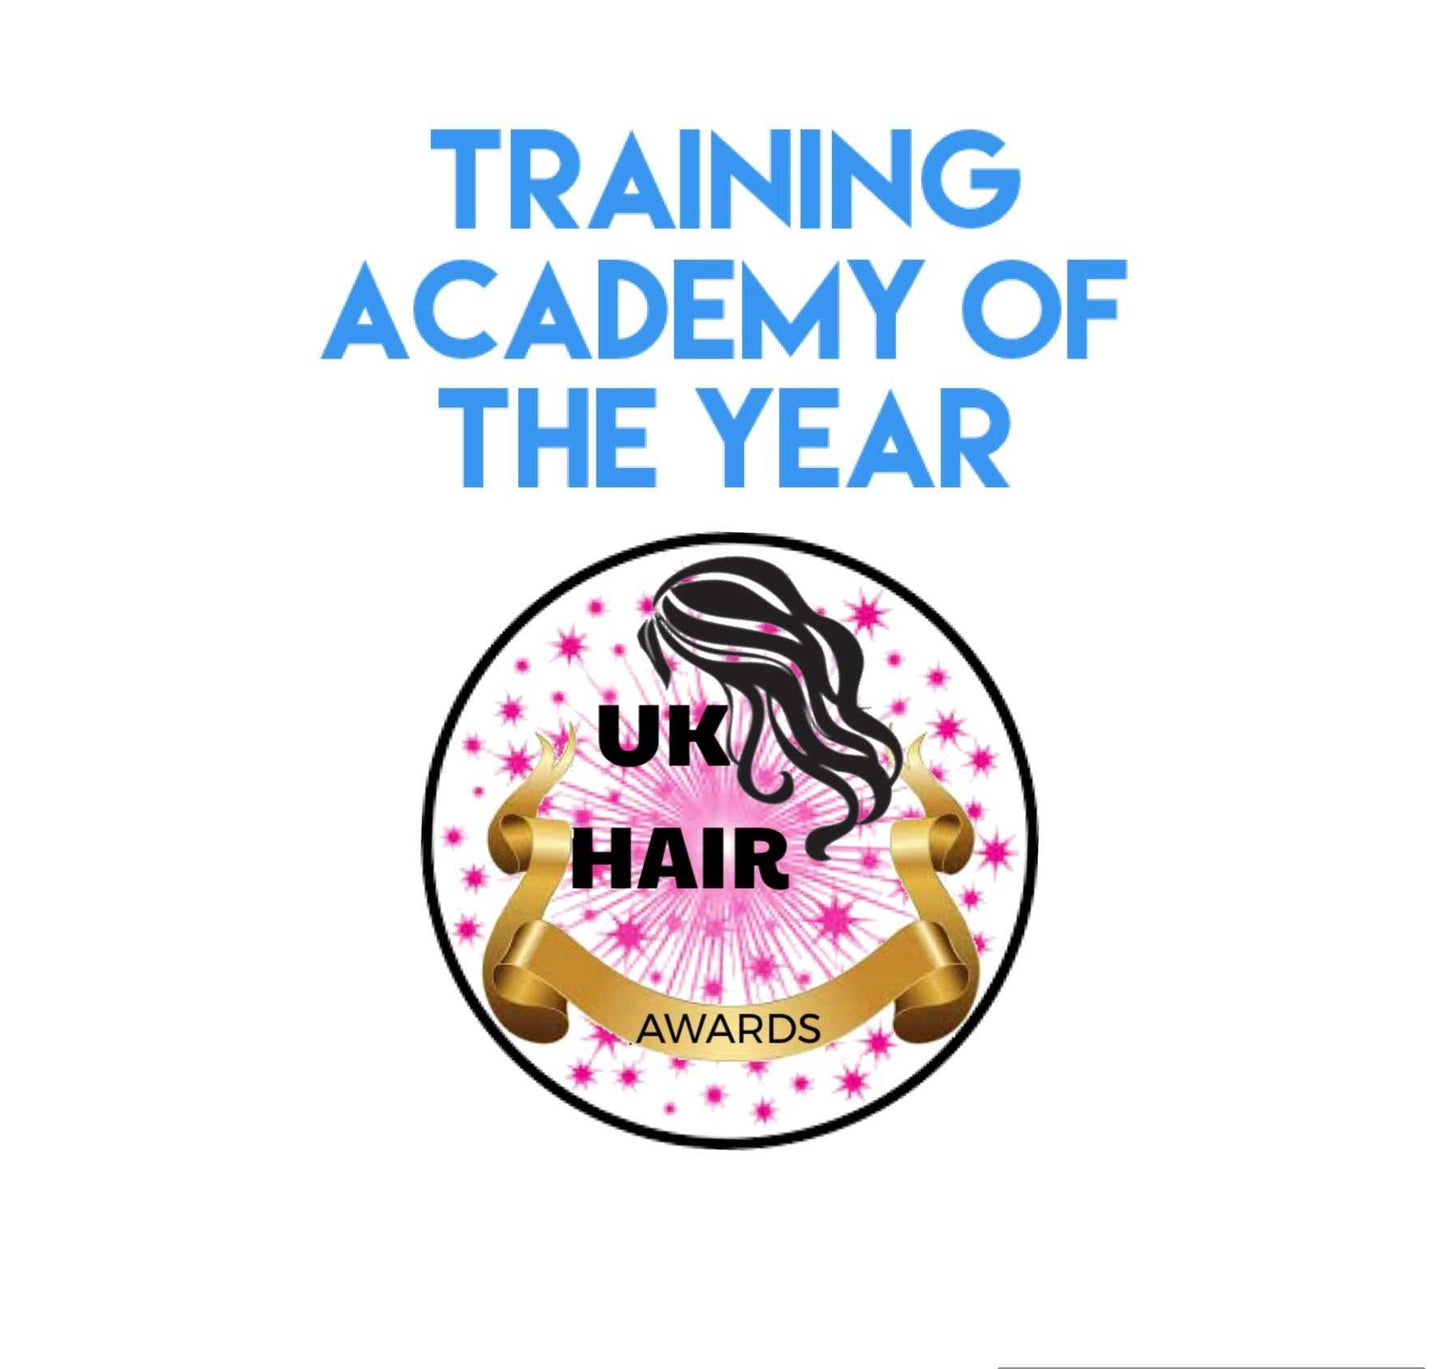 Hair beauty Holistics and products awards Titles entry 2023